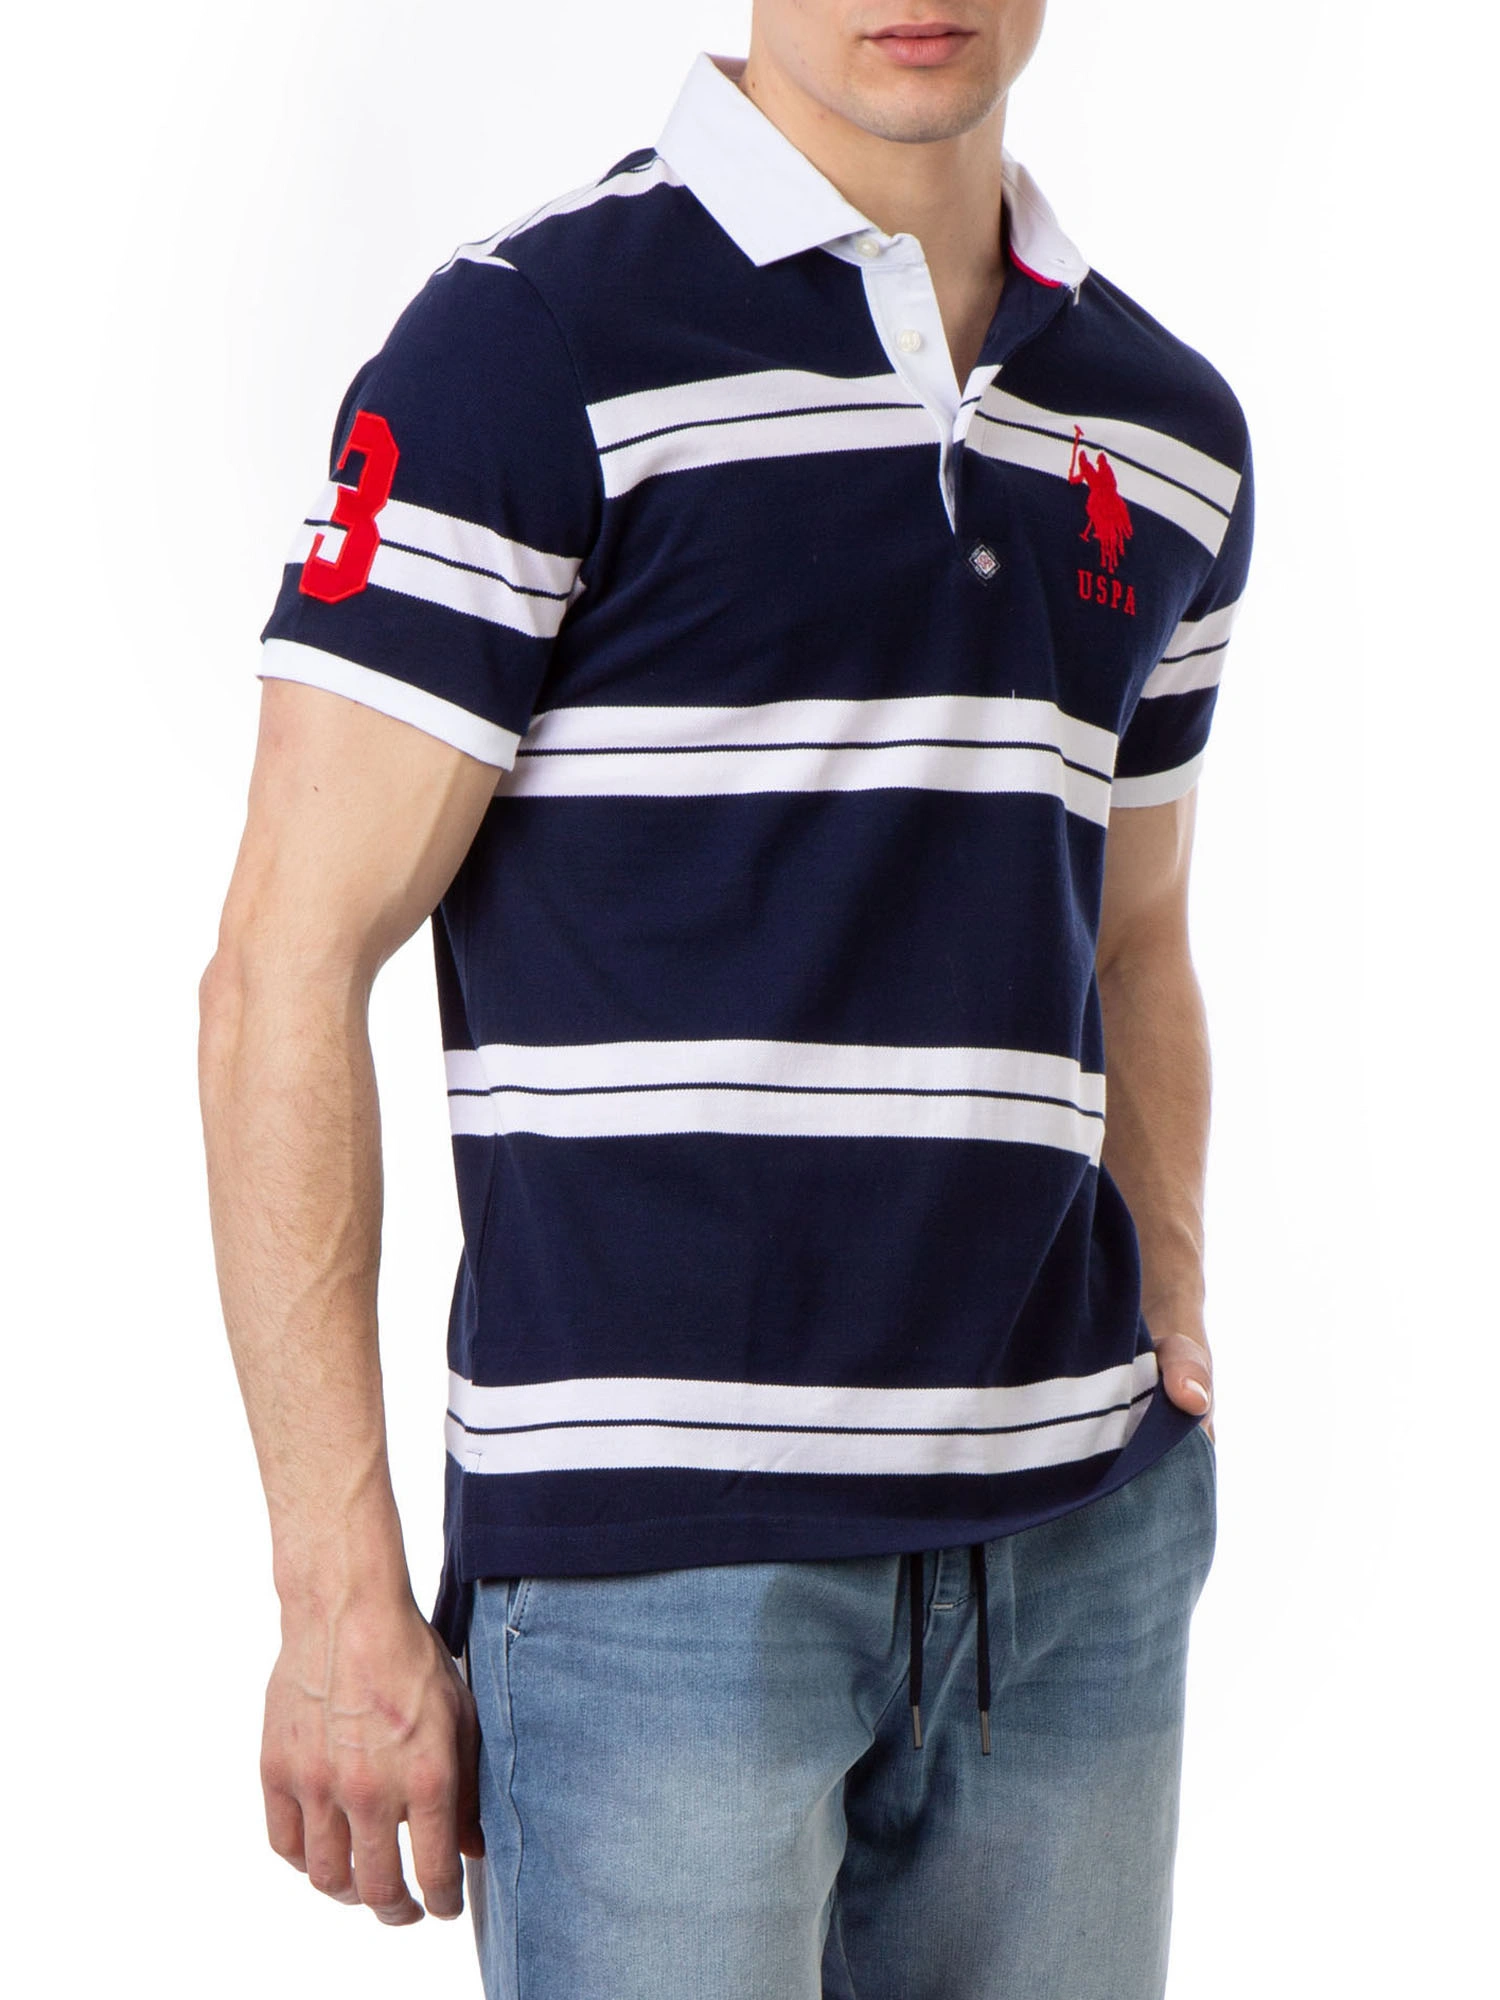 Wholesale Polo Shirt Supplier In Netherlands